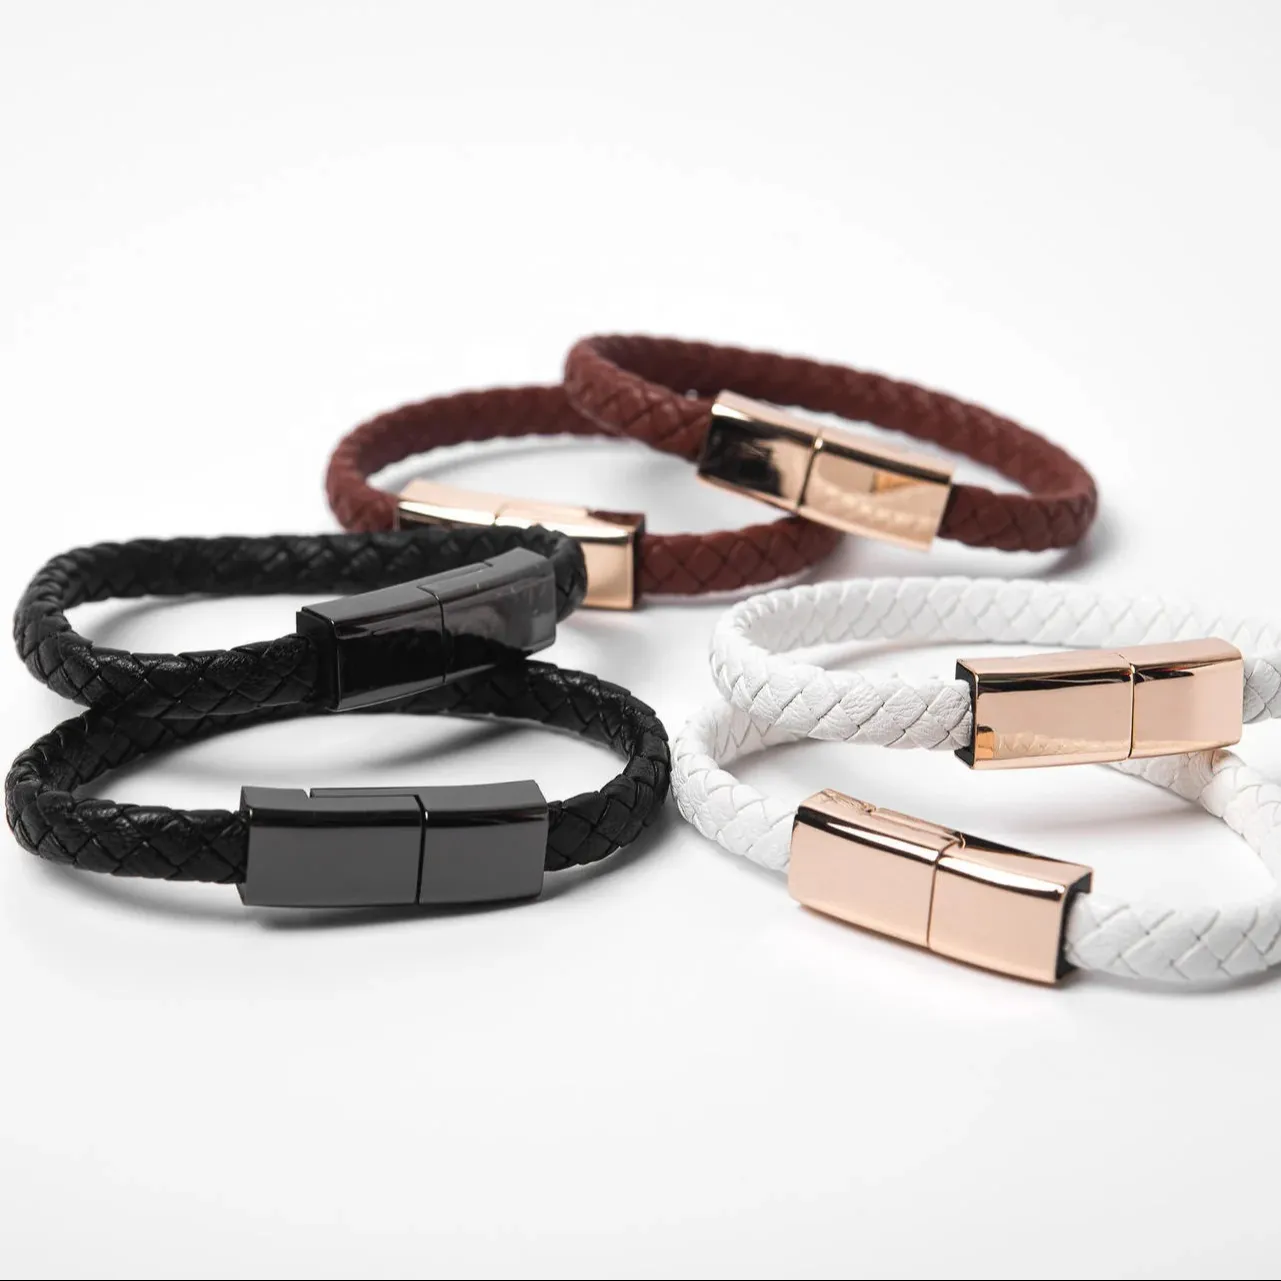 Micro Usb Charging Line Type c USB Cable 8 Pin Wrist Charging Cable Short Leather Bracelet Data Line